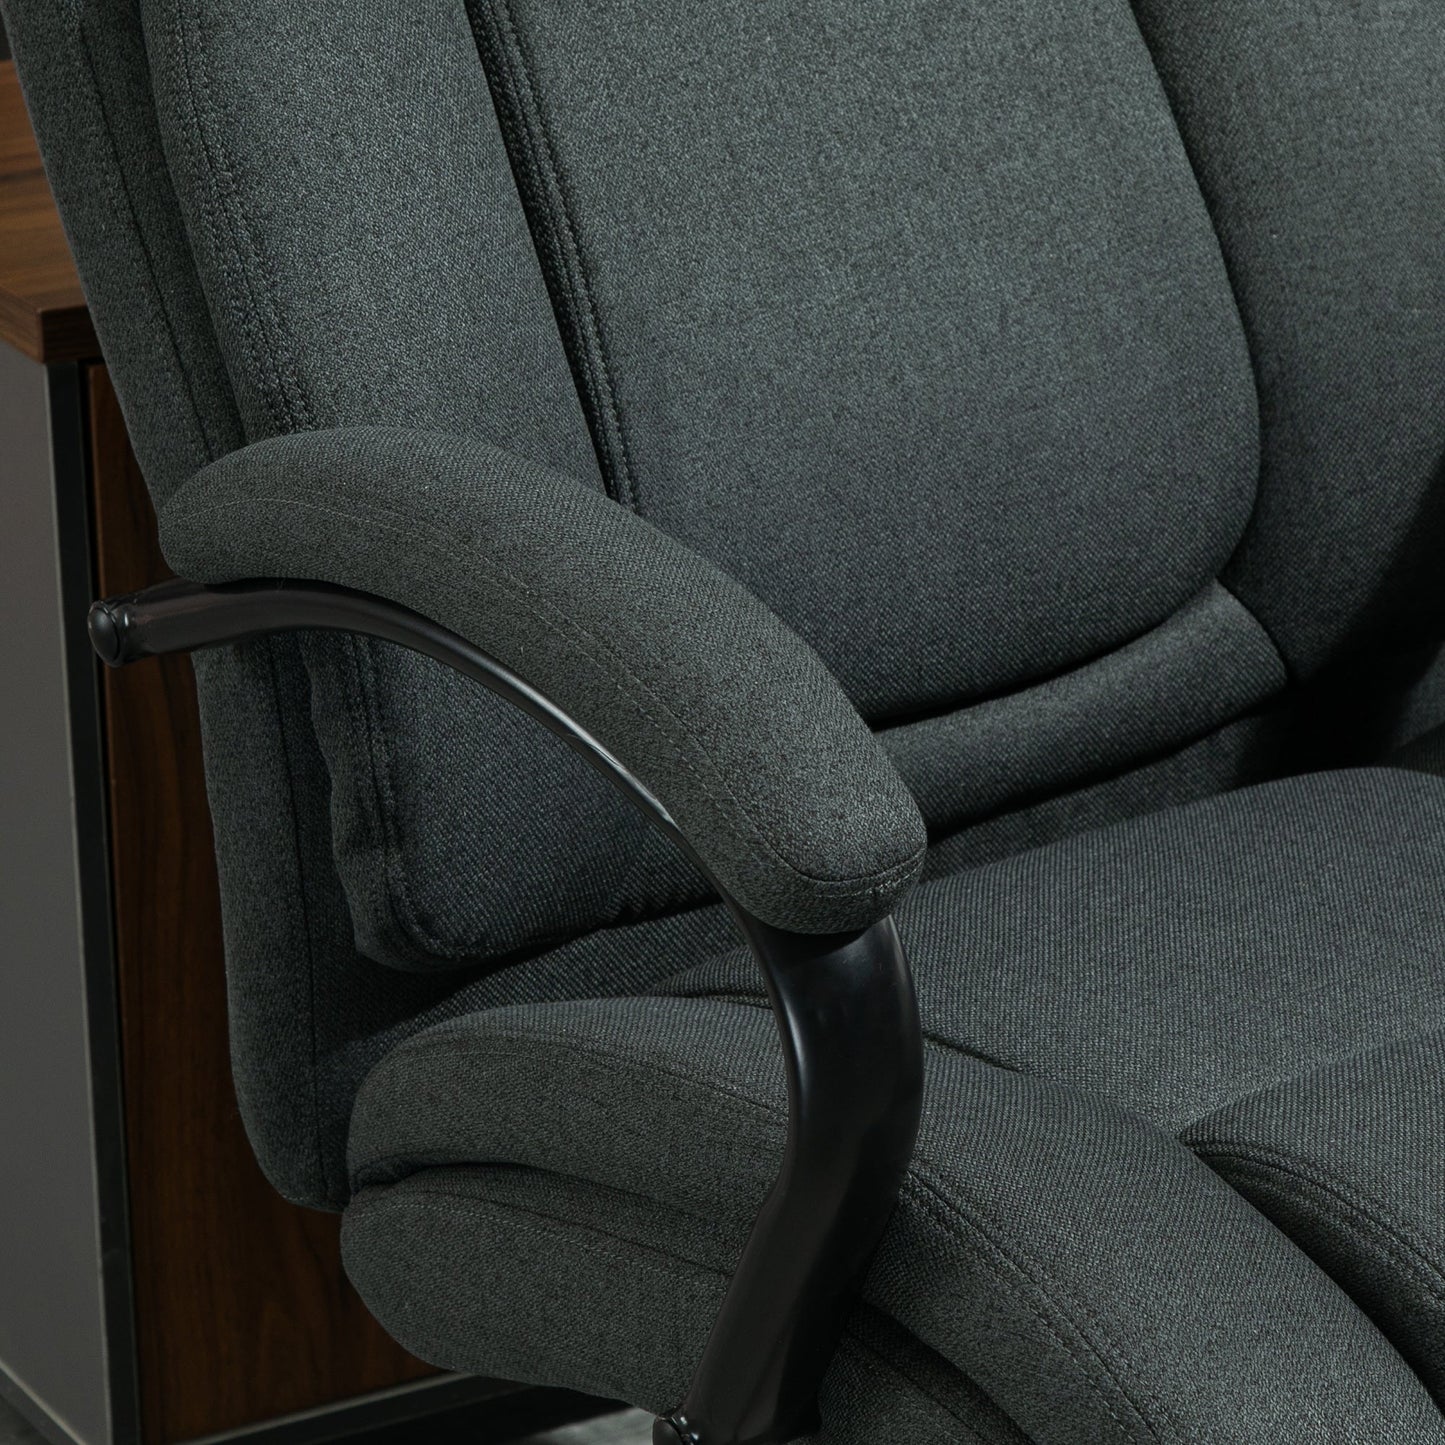 High Back Big and Tall Executive Office Chair 484lbs with Wide Seat, Computer Desk Chair with Linen Fabric, Adjustable Height, Swivel Wheels, Charcoal Grey